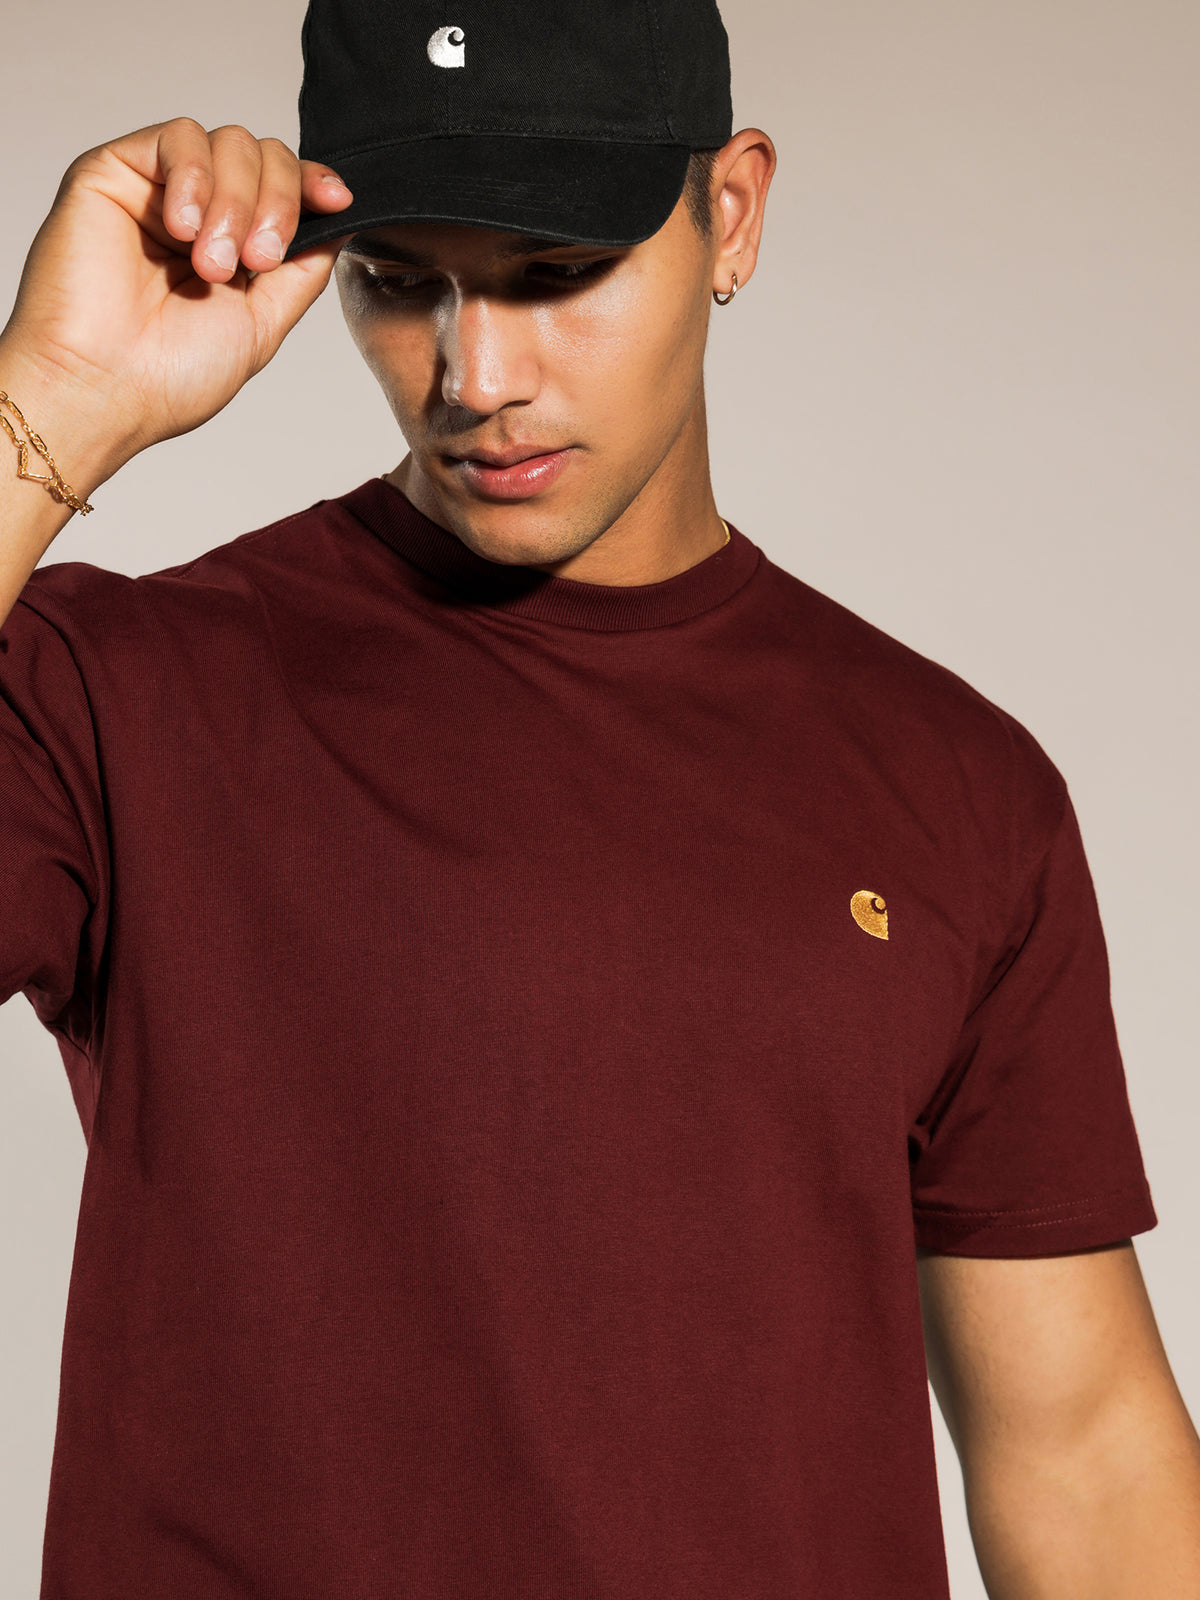 Chase T-Shirt in Bordeaux Red